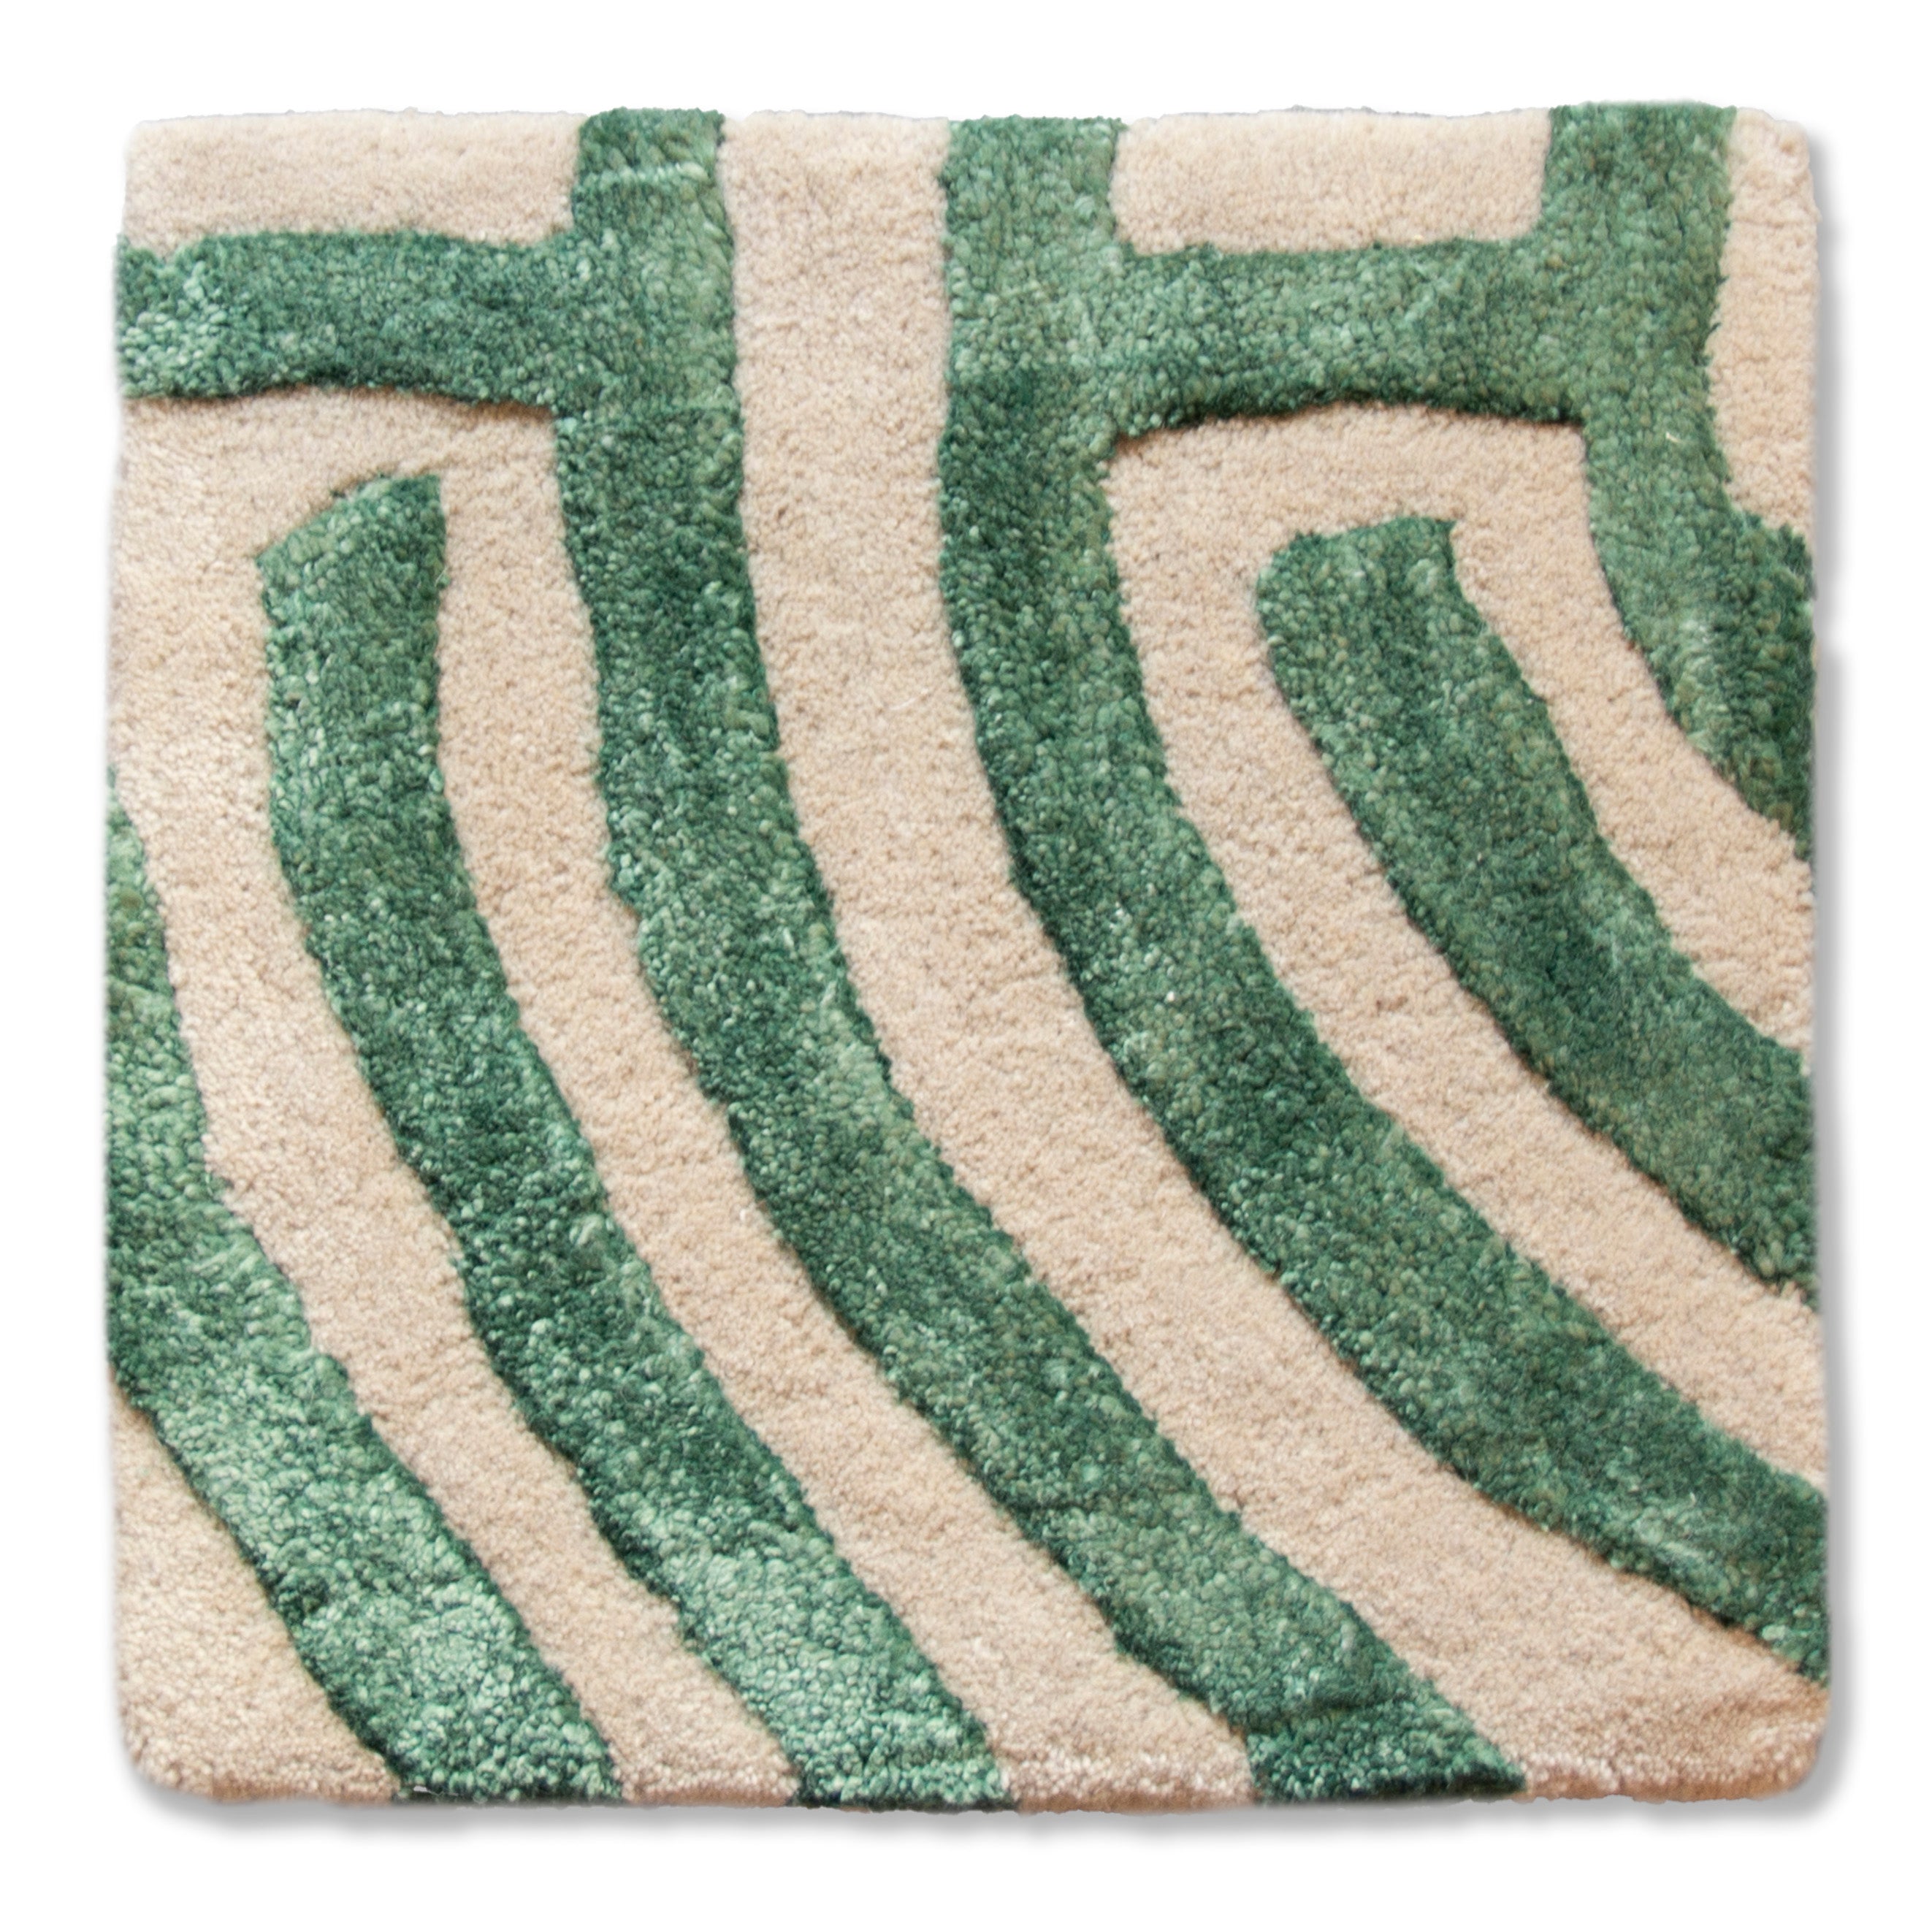 Labyrinth Collection Maze Rug Sample (12x12) by Kevin Francis Design | Luxury Home Decor